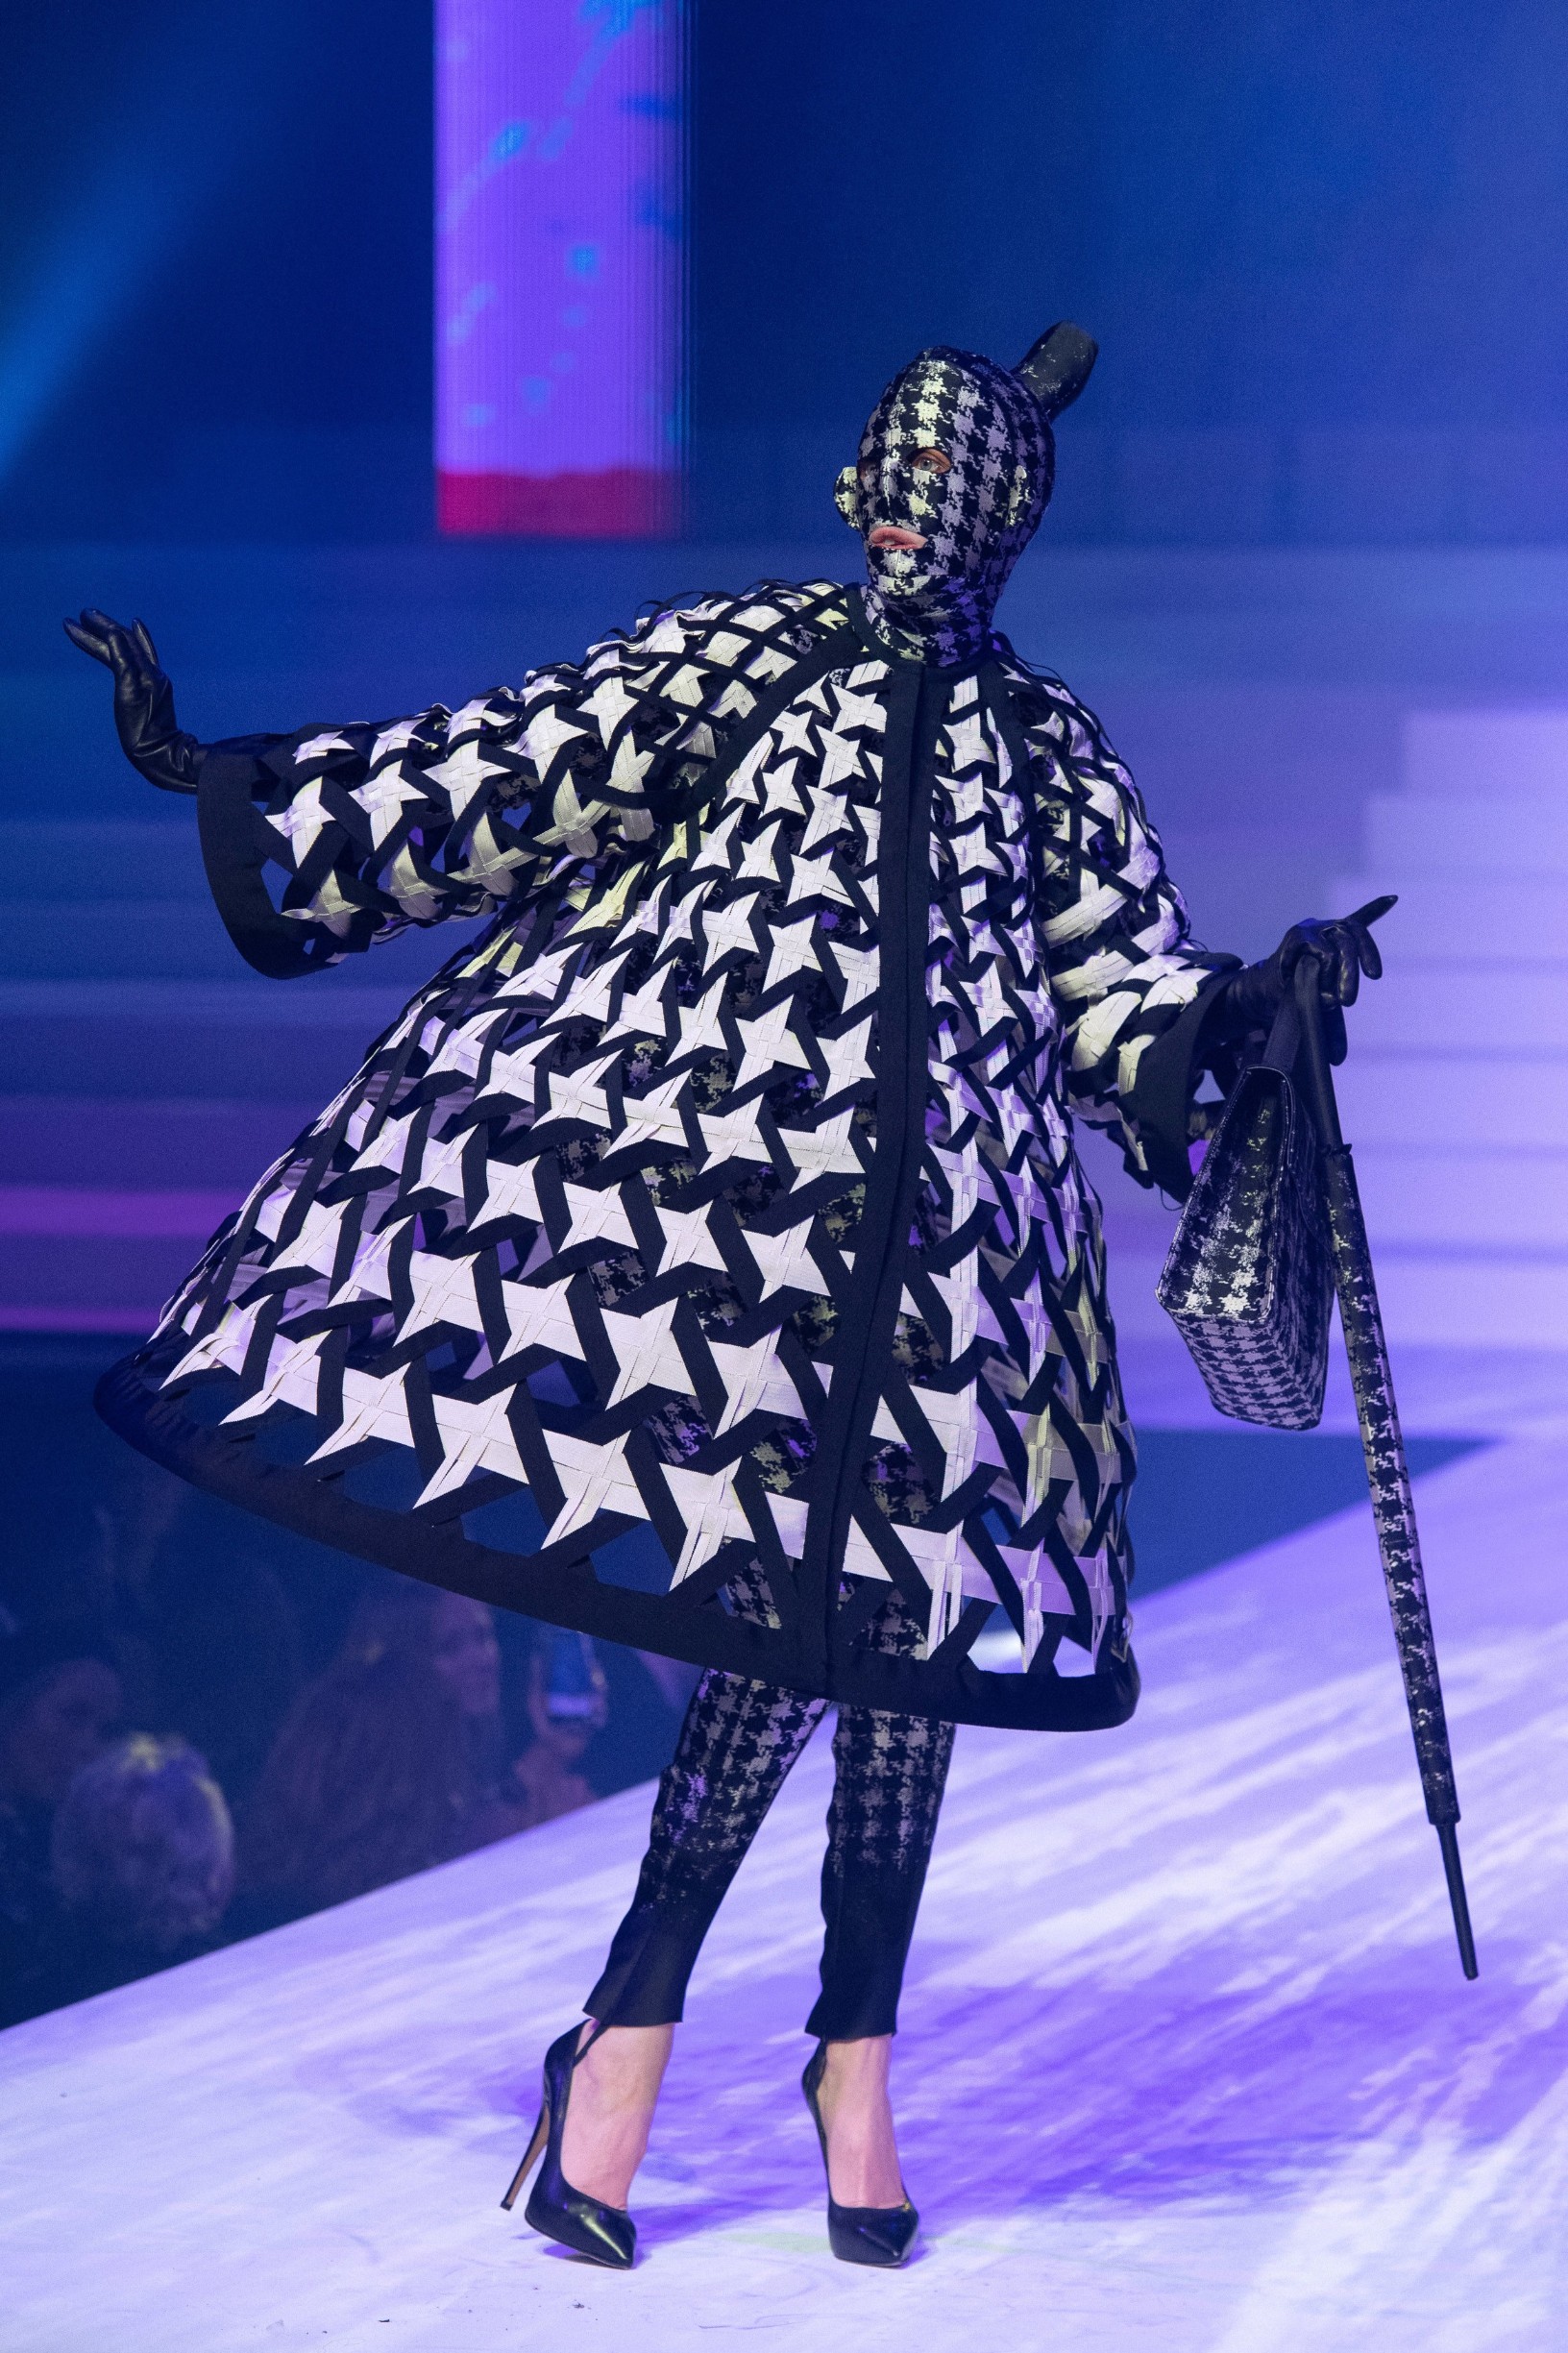 Anna Cleveland walks the runway during the last Jean-Paul Gaultier Haute Couture Spring/Summer 2020 show as part of Paris Fashion Week in Paris, France on January 22, 2020., Image: 494351032, License: Rights-managed, Restrictions: , Model Release: no, Credit line: Marechal Aurore/ABACA / Abaca Press / Profimedia